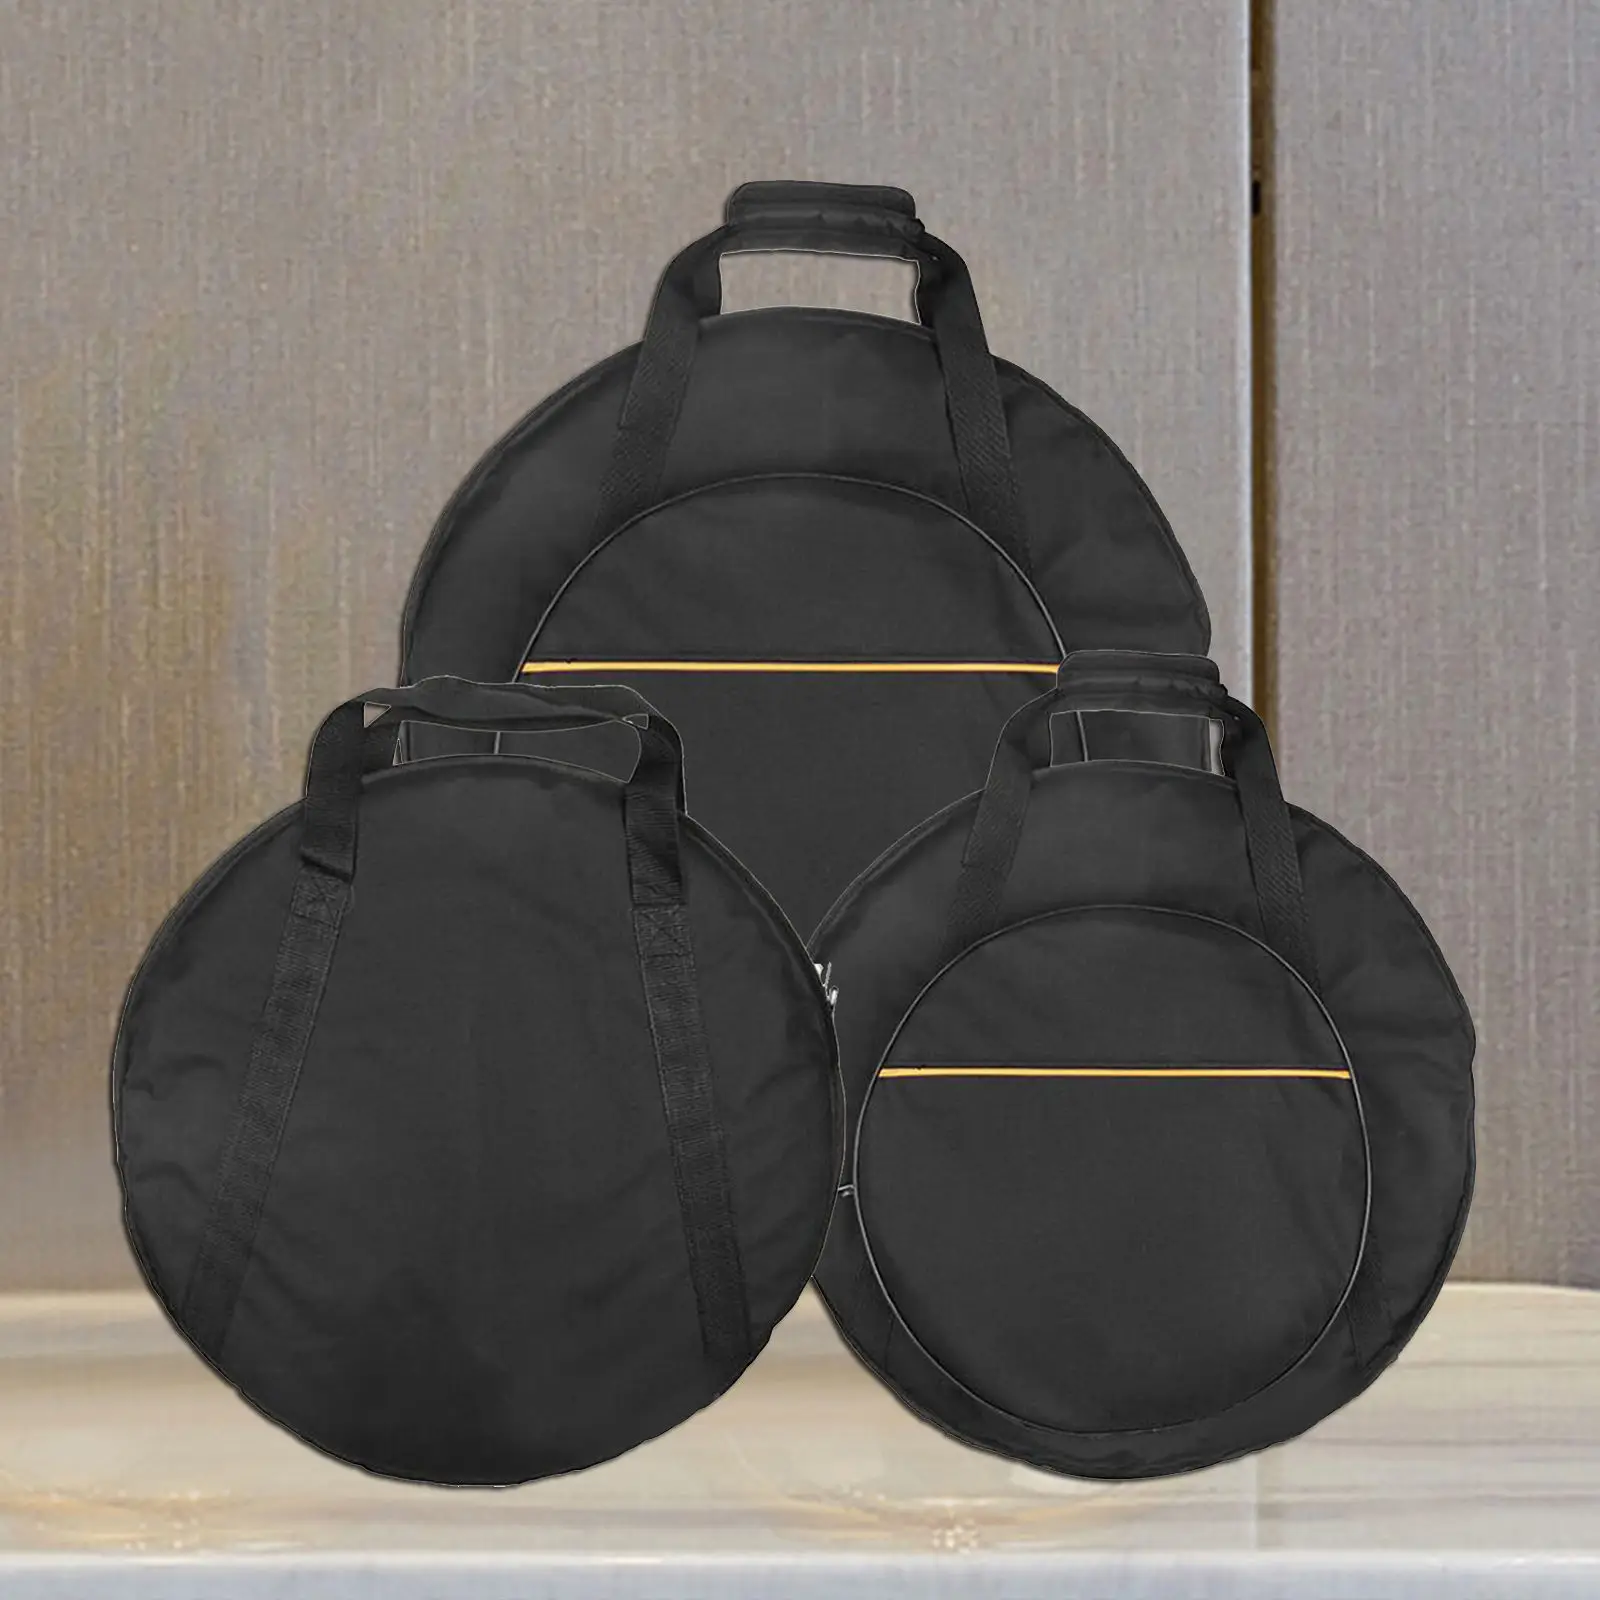 1PC Cymbal Storage Bag Percussion Instrument Accessories Black Cymbal Carrying Case Waterproof with Padded Dividers